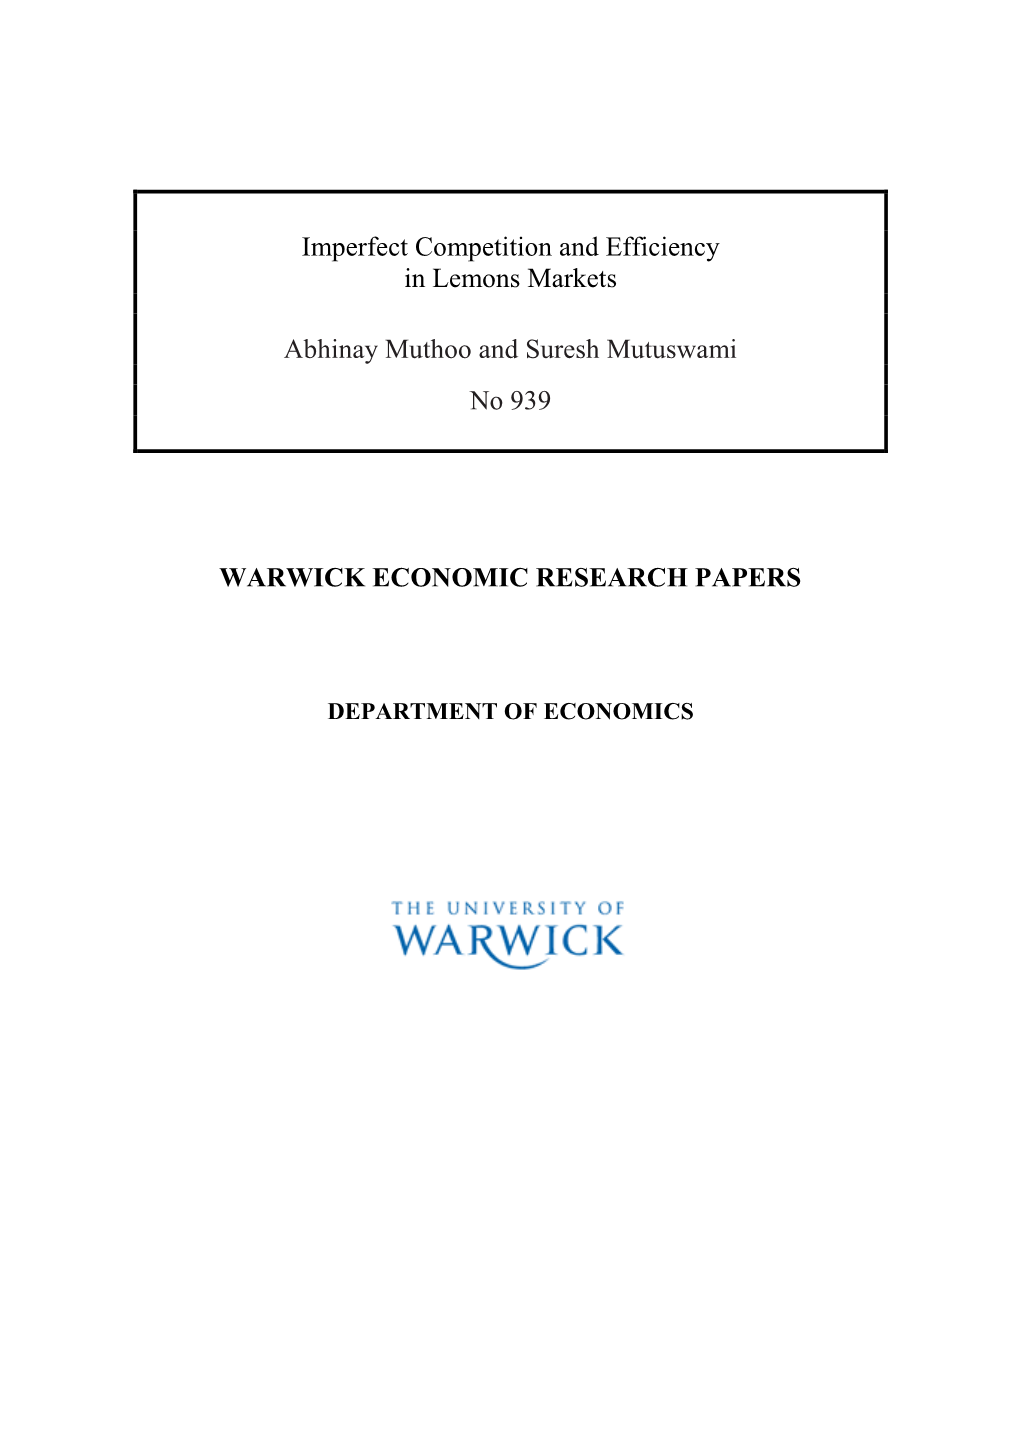 Imperfect Competition and Efficiency in Lemons Markets Abhinay Muthoo and Suresh Mutuswami No 939 WARWICK ECONOMIC RESEARCH